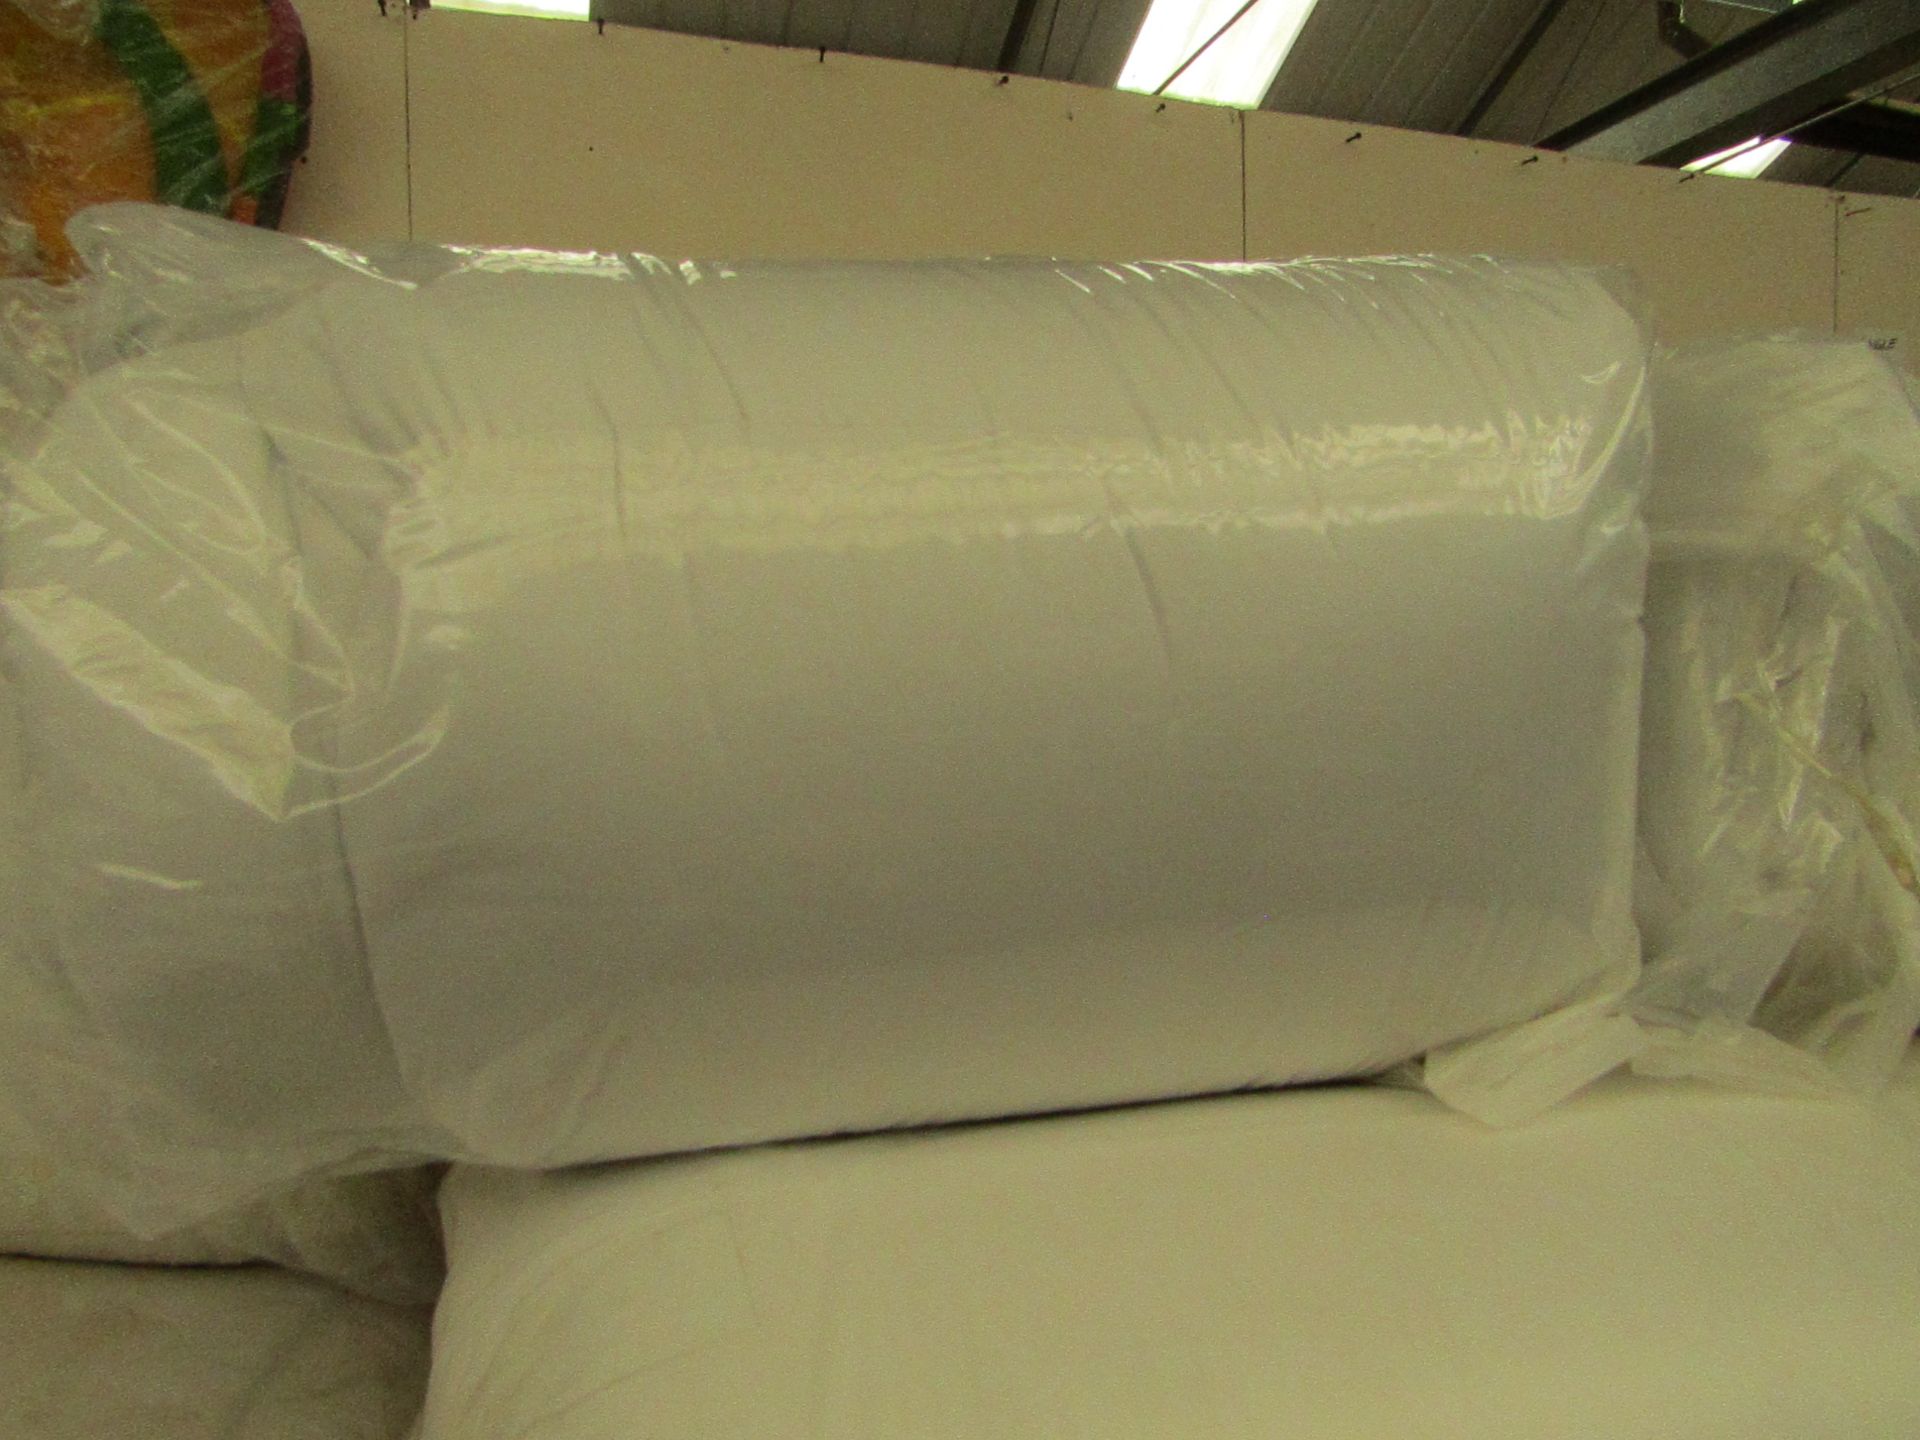 Unbranded King Duvet, new and packaged slight seconds